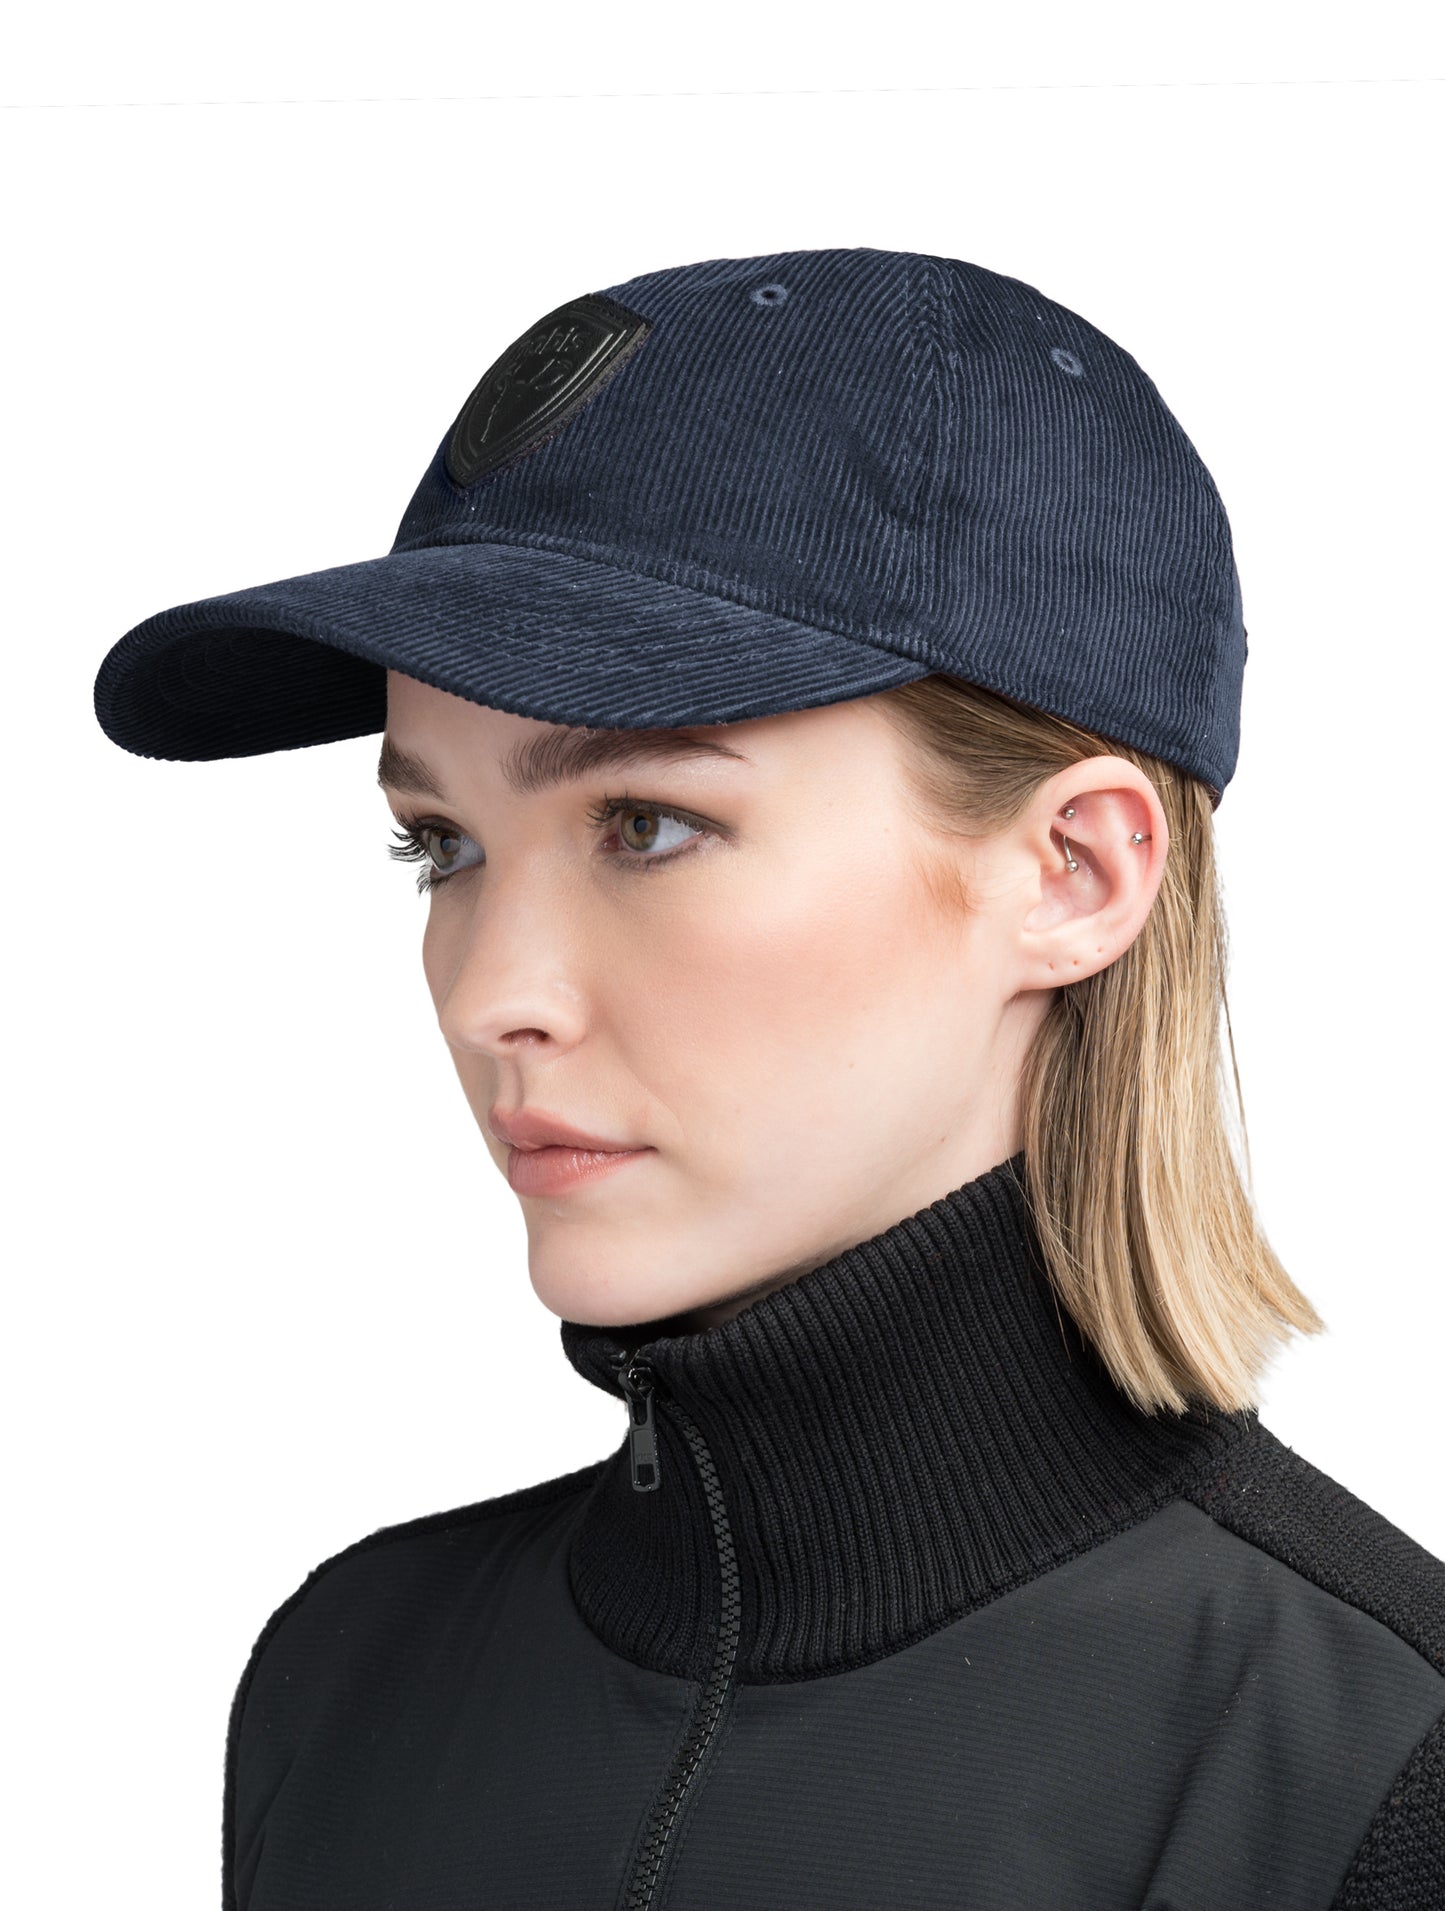 Carter Unisex Tailored Ball Cap in 100% cotton corduroy, unstructured crown, curved brim, and leather strap back with metal buckle closure, in Navy